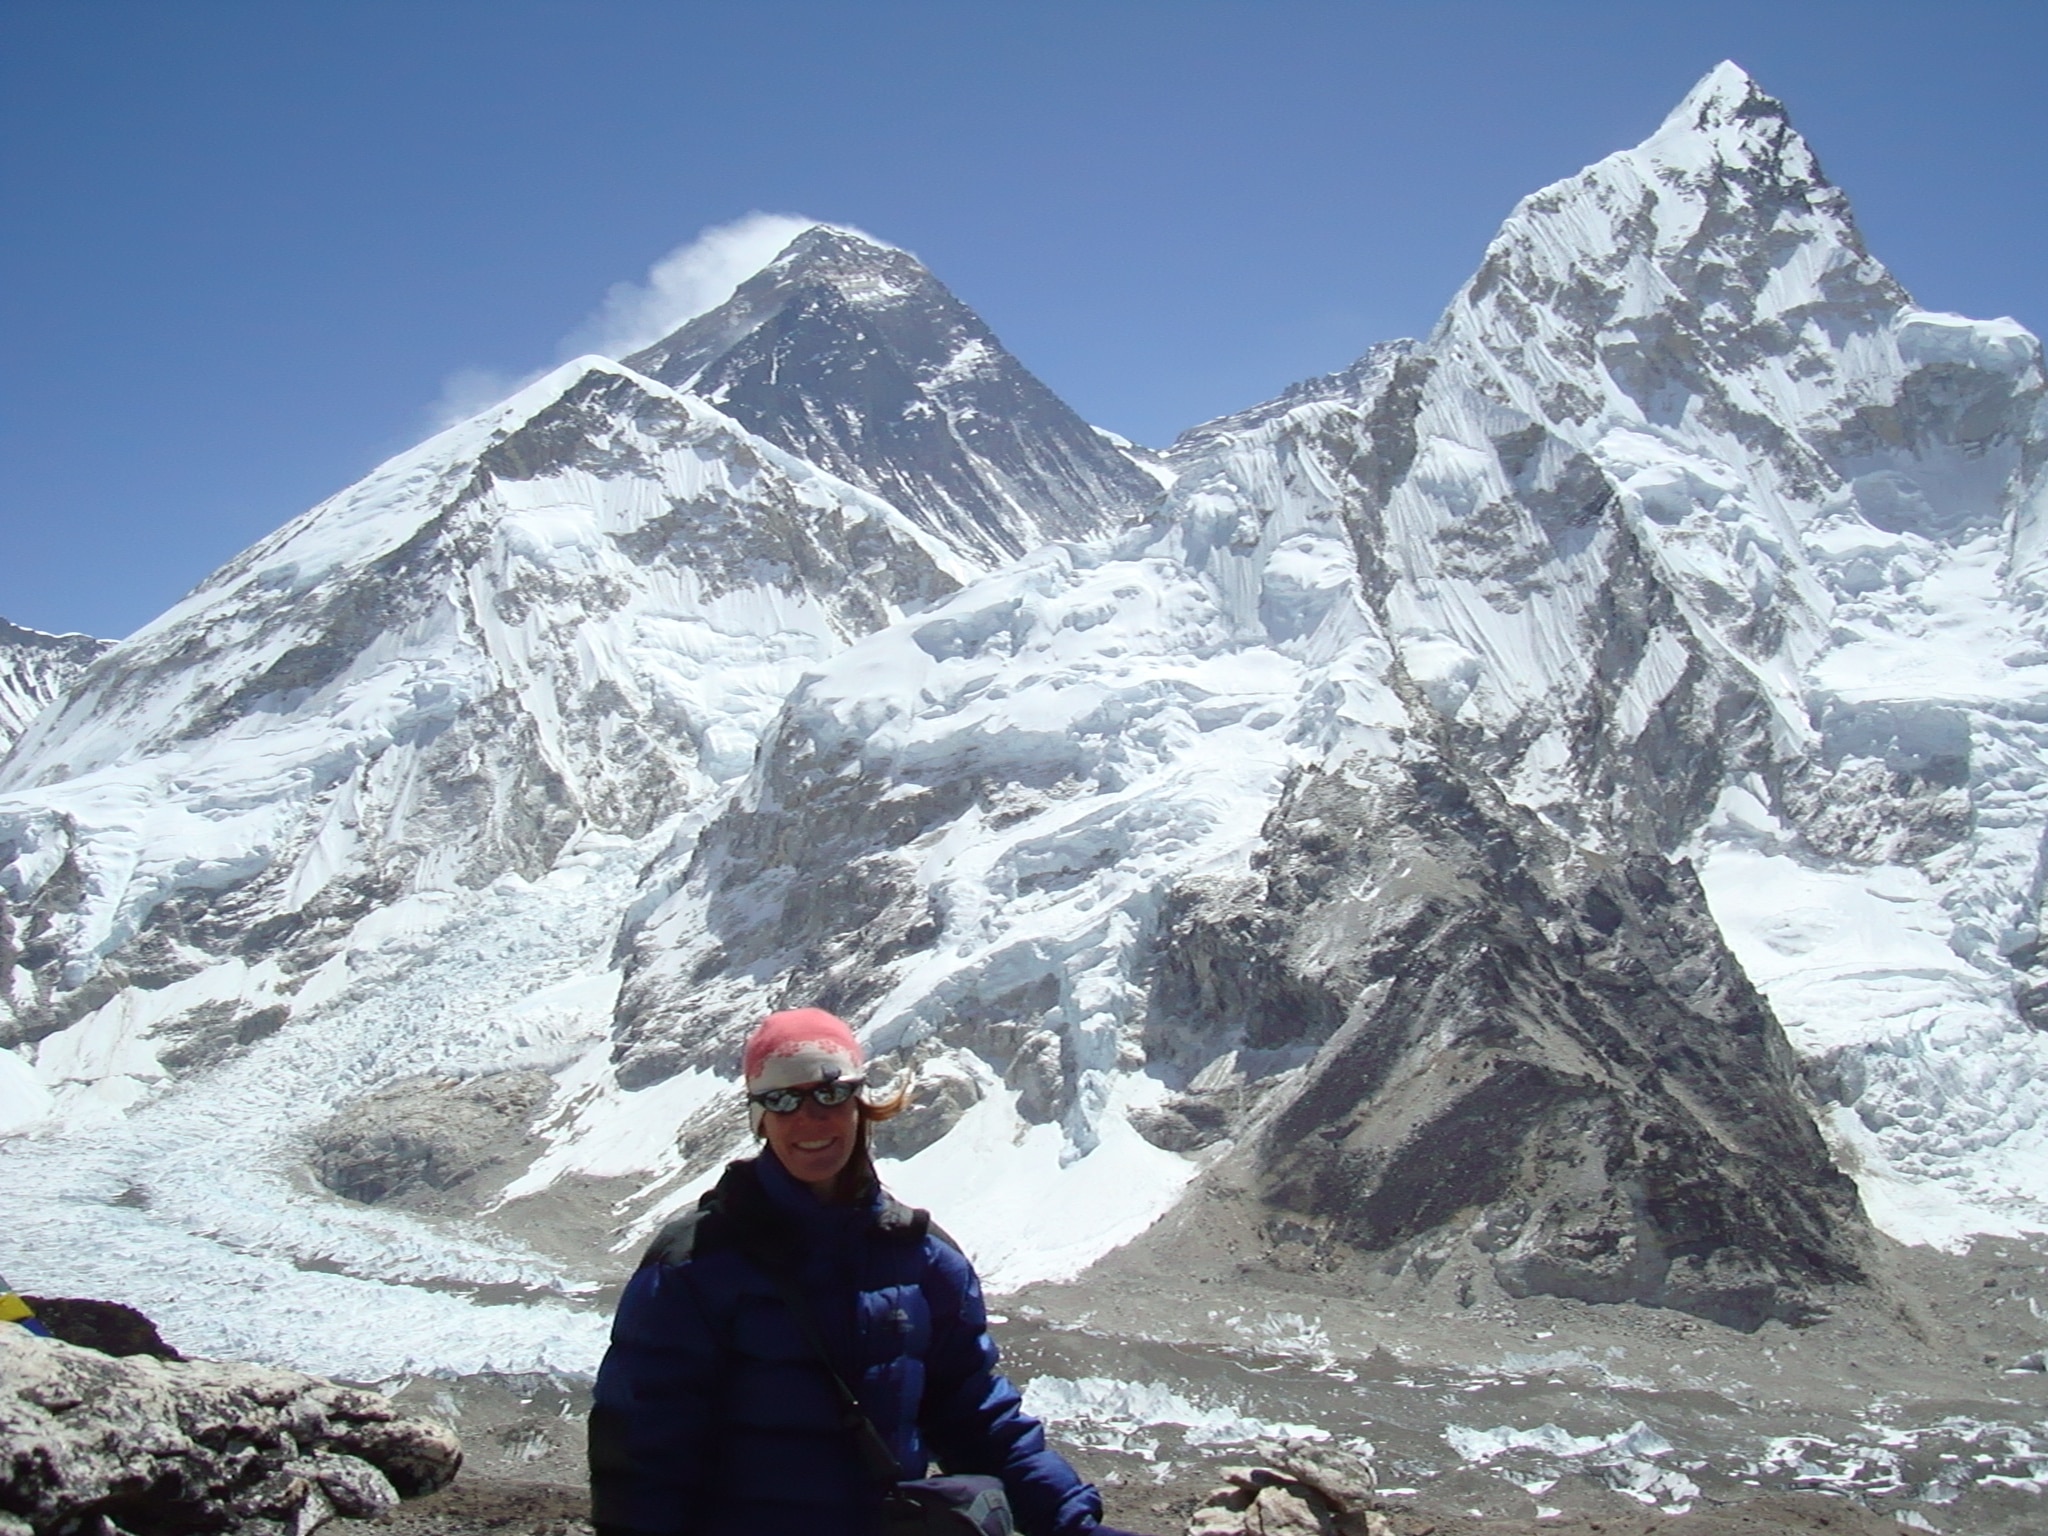 The view of Everest from Kala Phattar